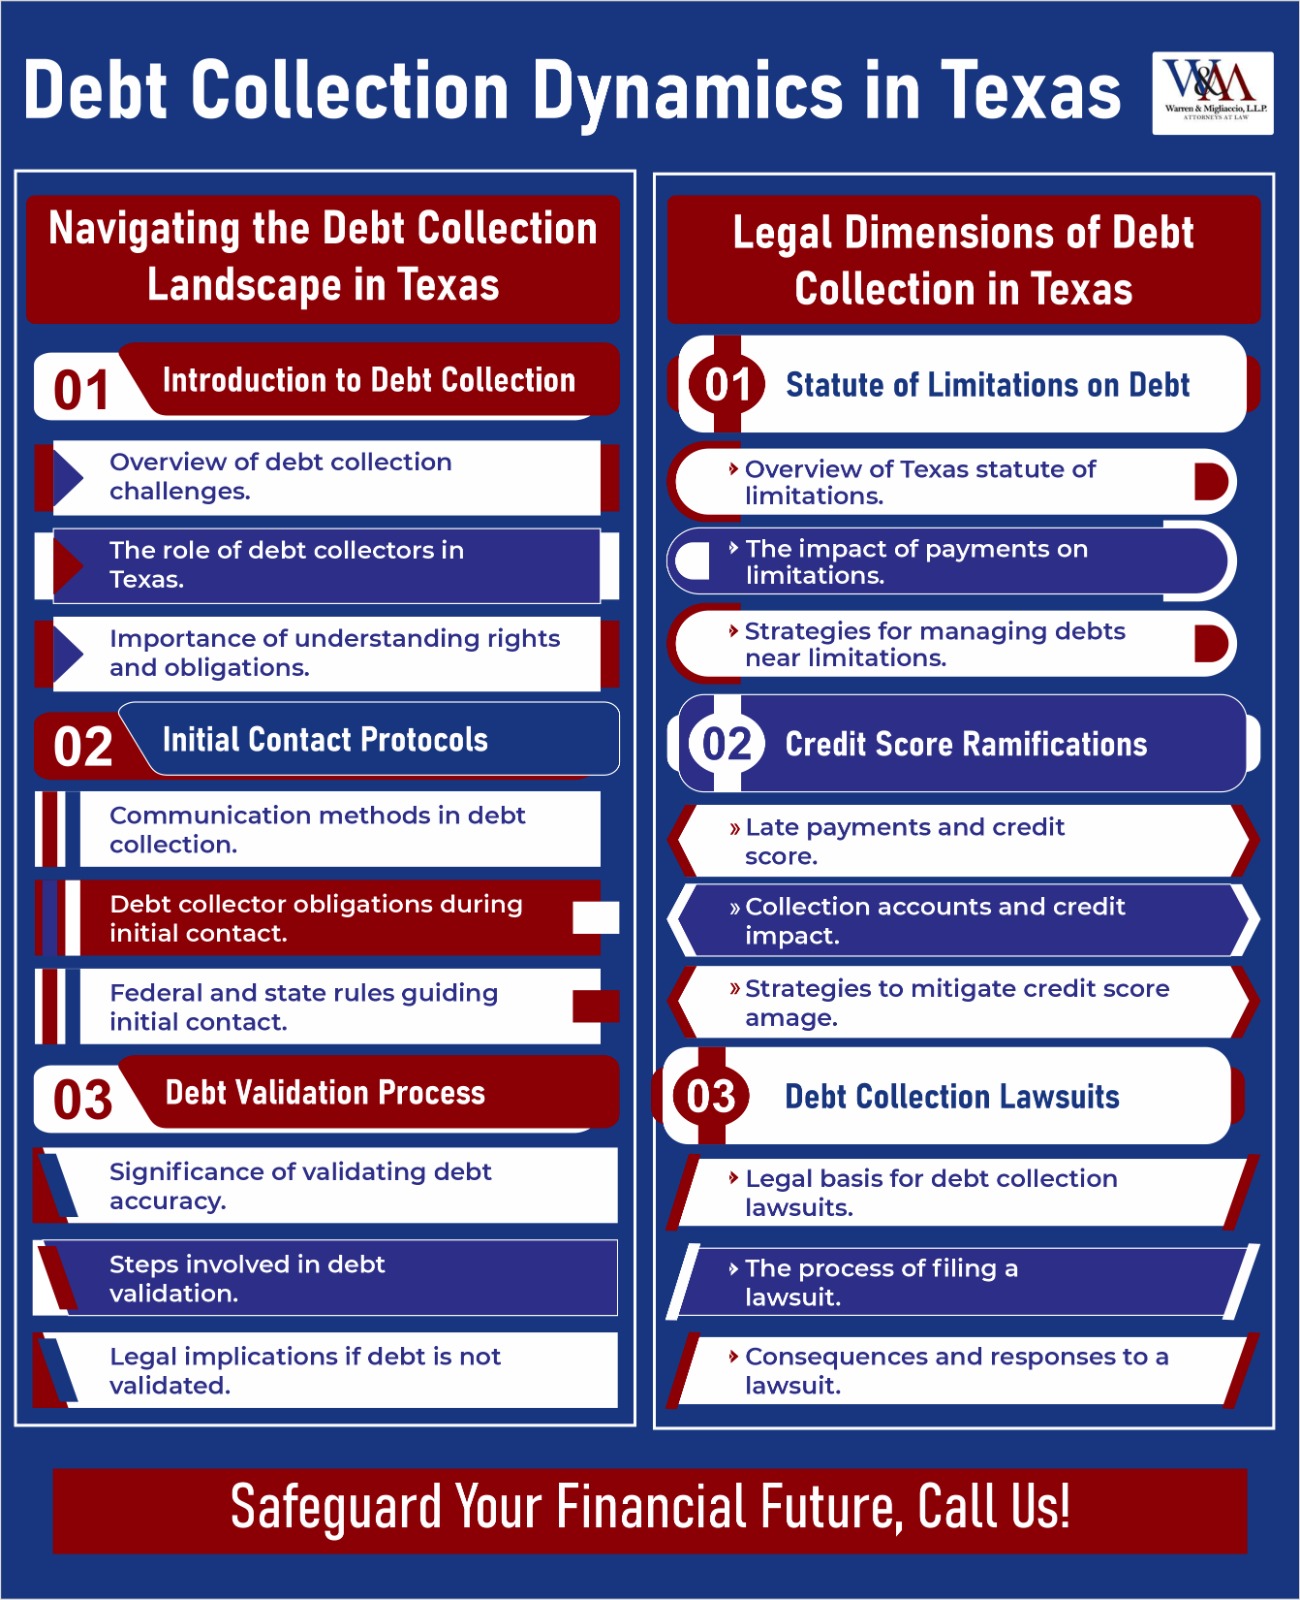 Understanding debt collection dynamics and the possibility of debt collectors suing individuals in Texas.